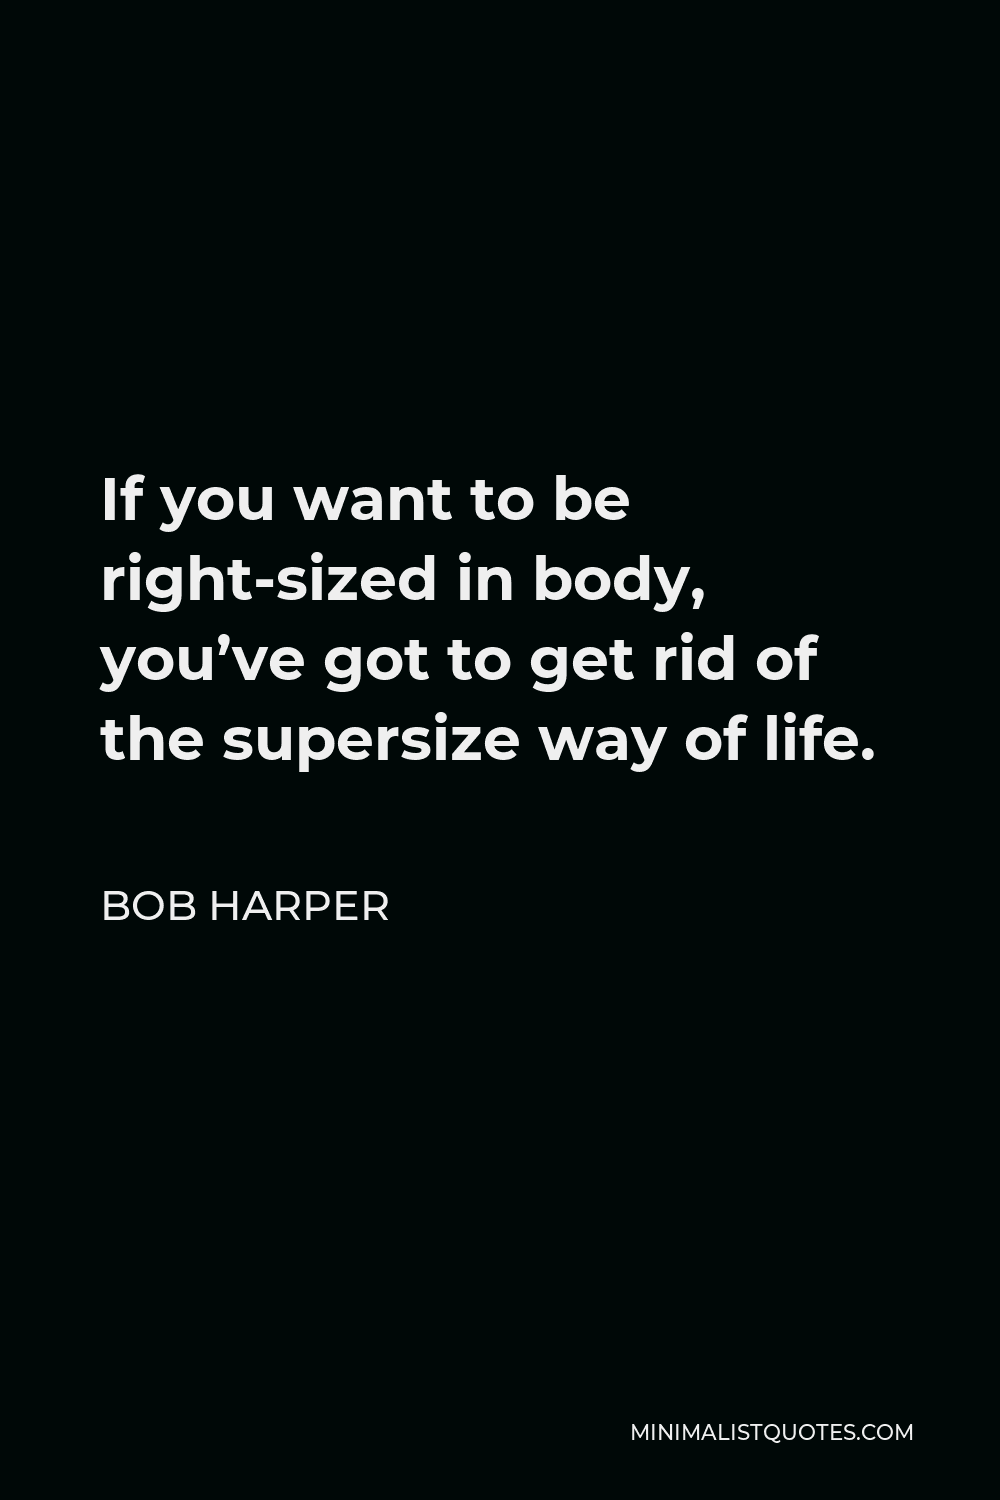 Bob Harper Quote - If you want to be right-sized in body, you’ve got to get rid of the supersize way of life.